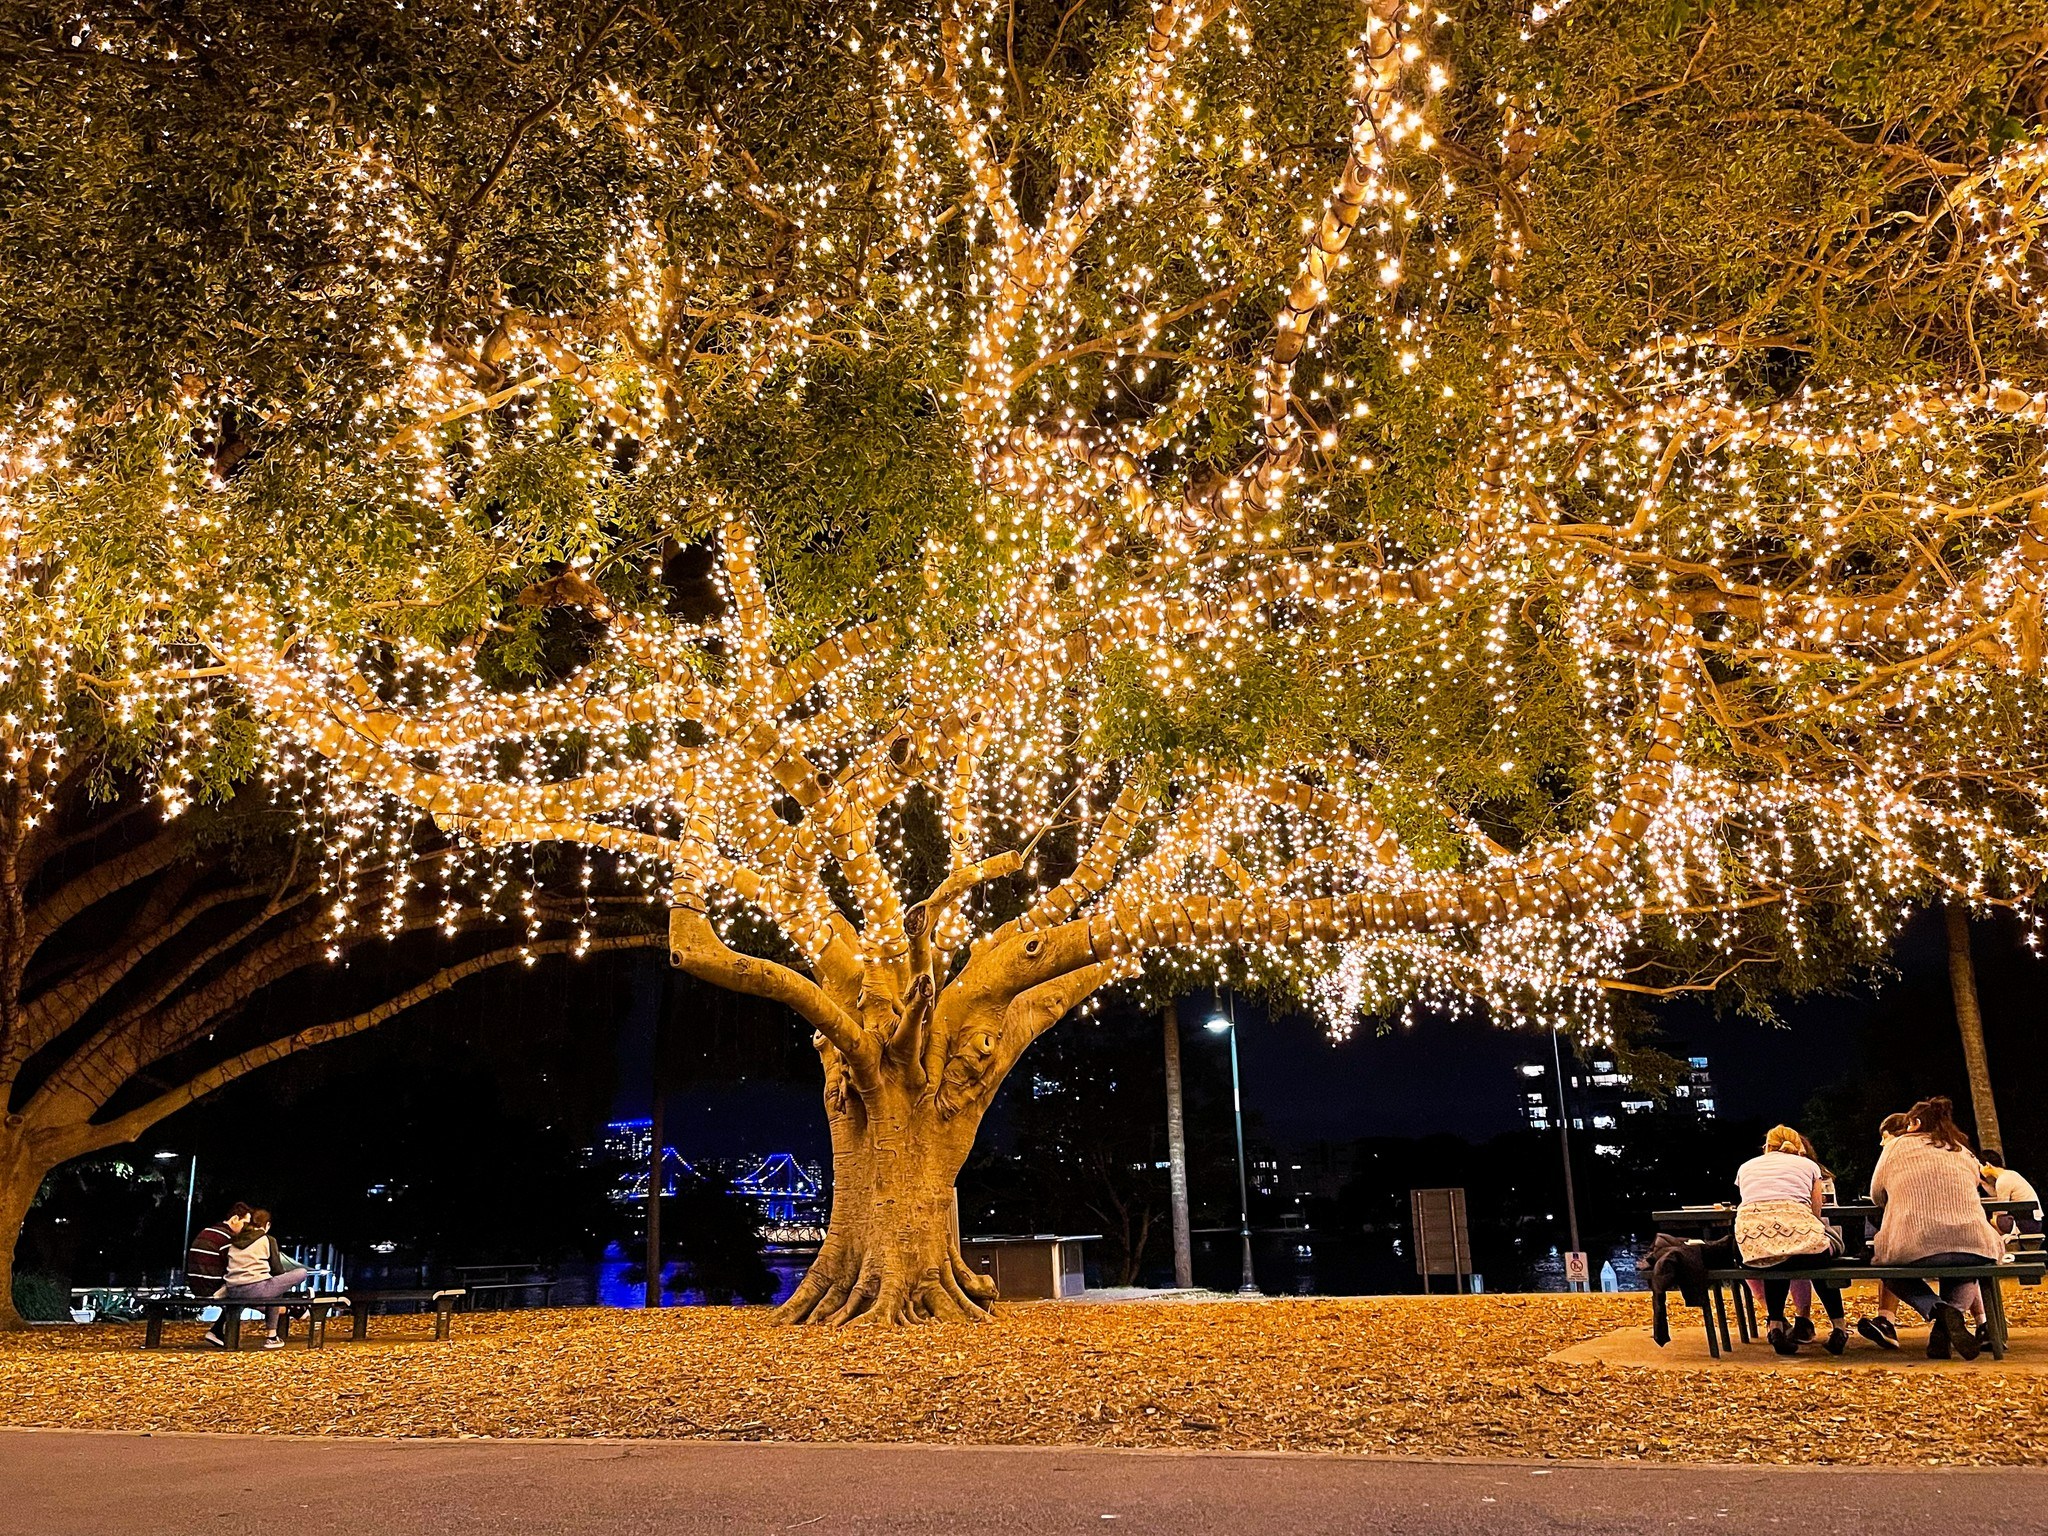 A night-time image of a tree illuminated by hundreds of small LED fairy lights rated for outdoor usage